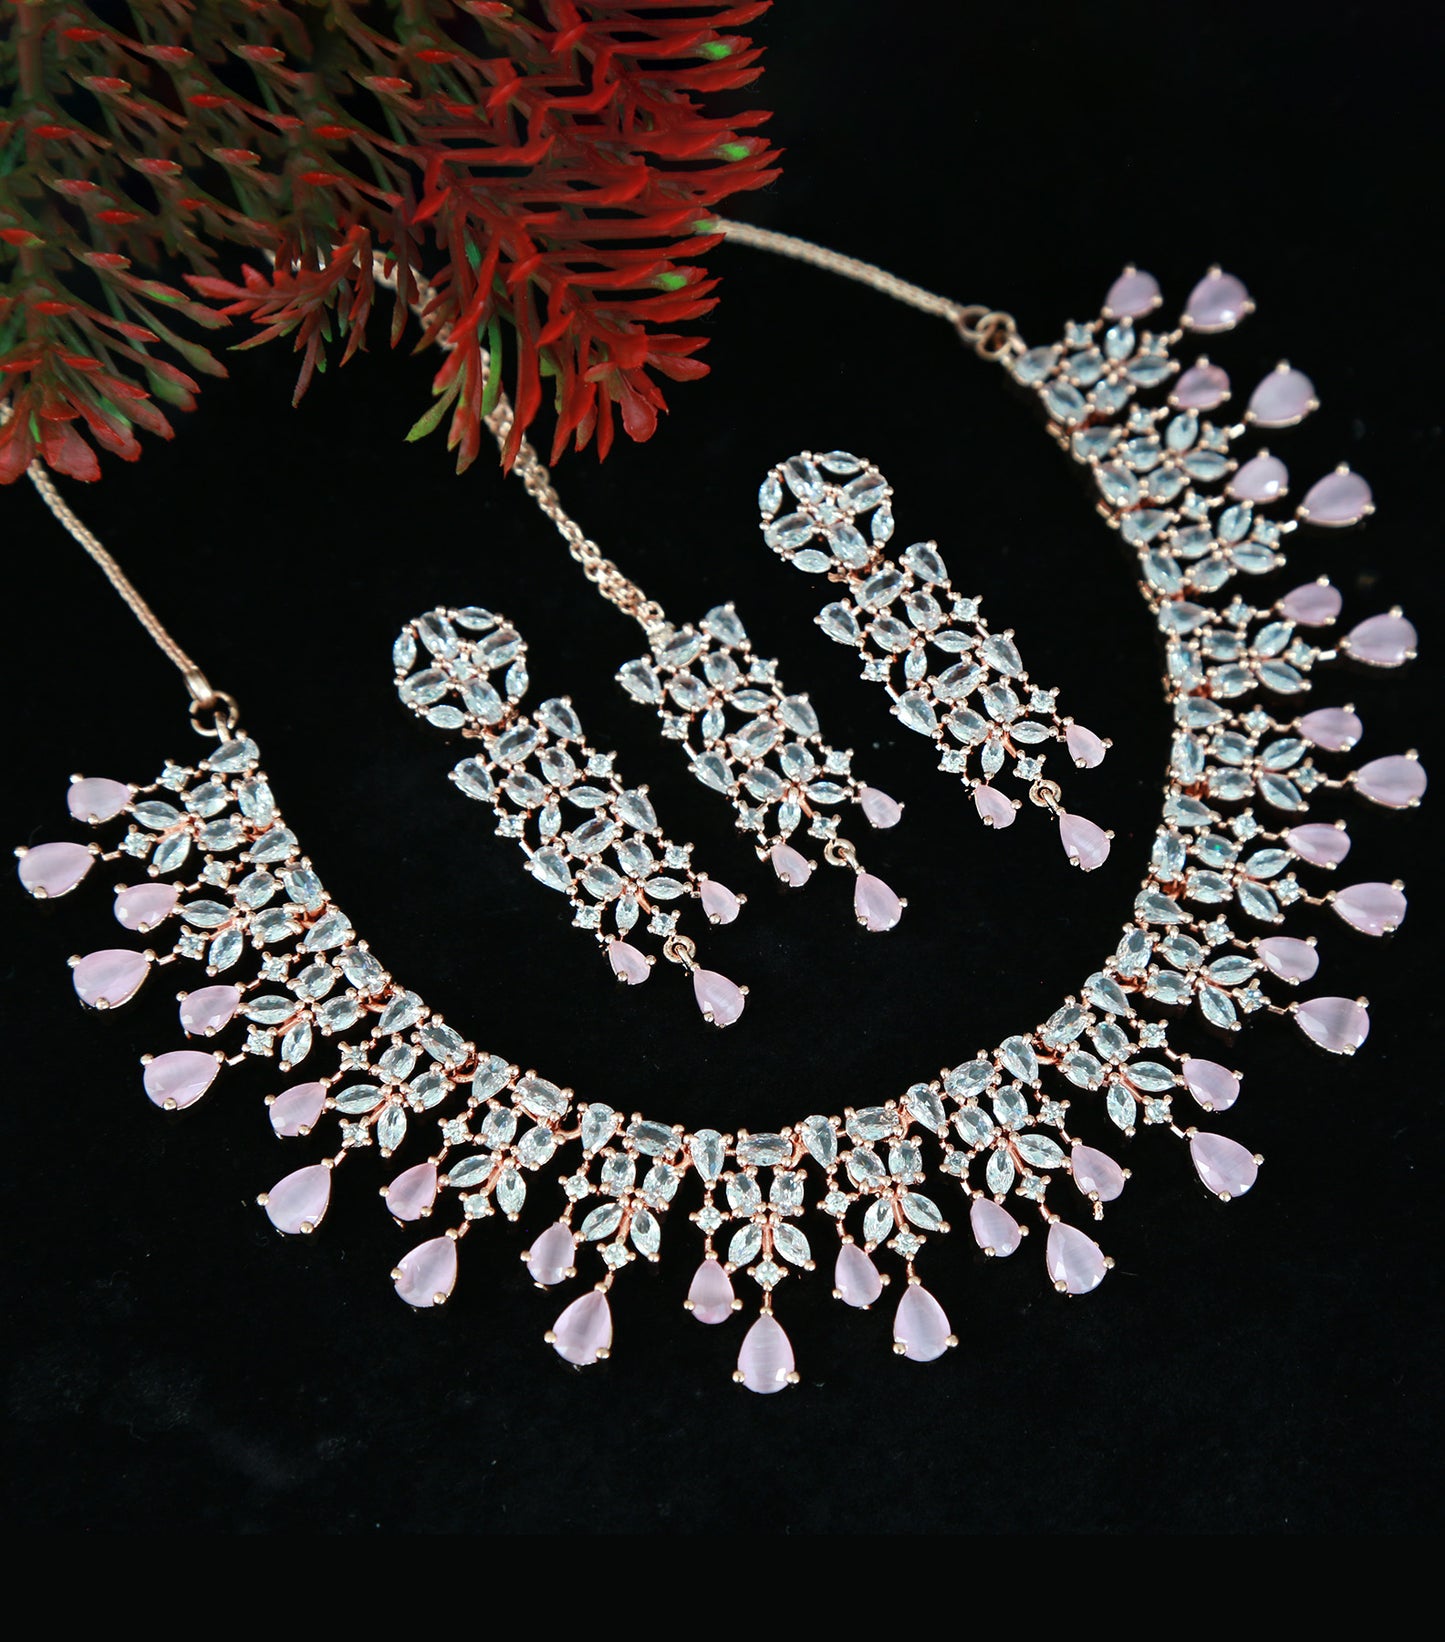 Rose gold American diamond necklace | High Quality CZ Diamonds Mint Green stone Necklace Earrings Set